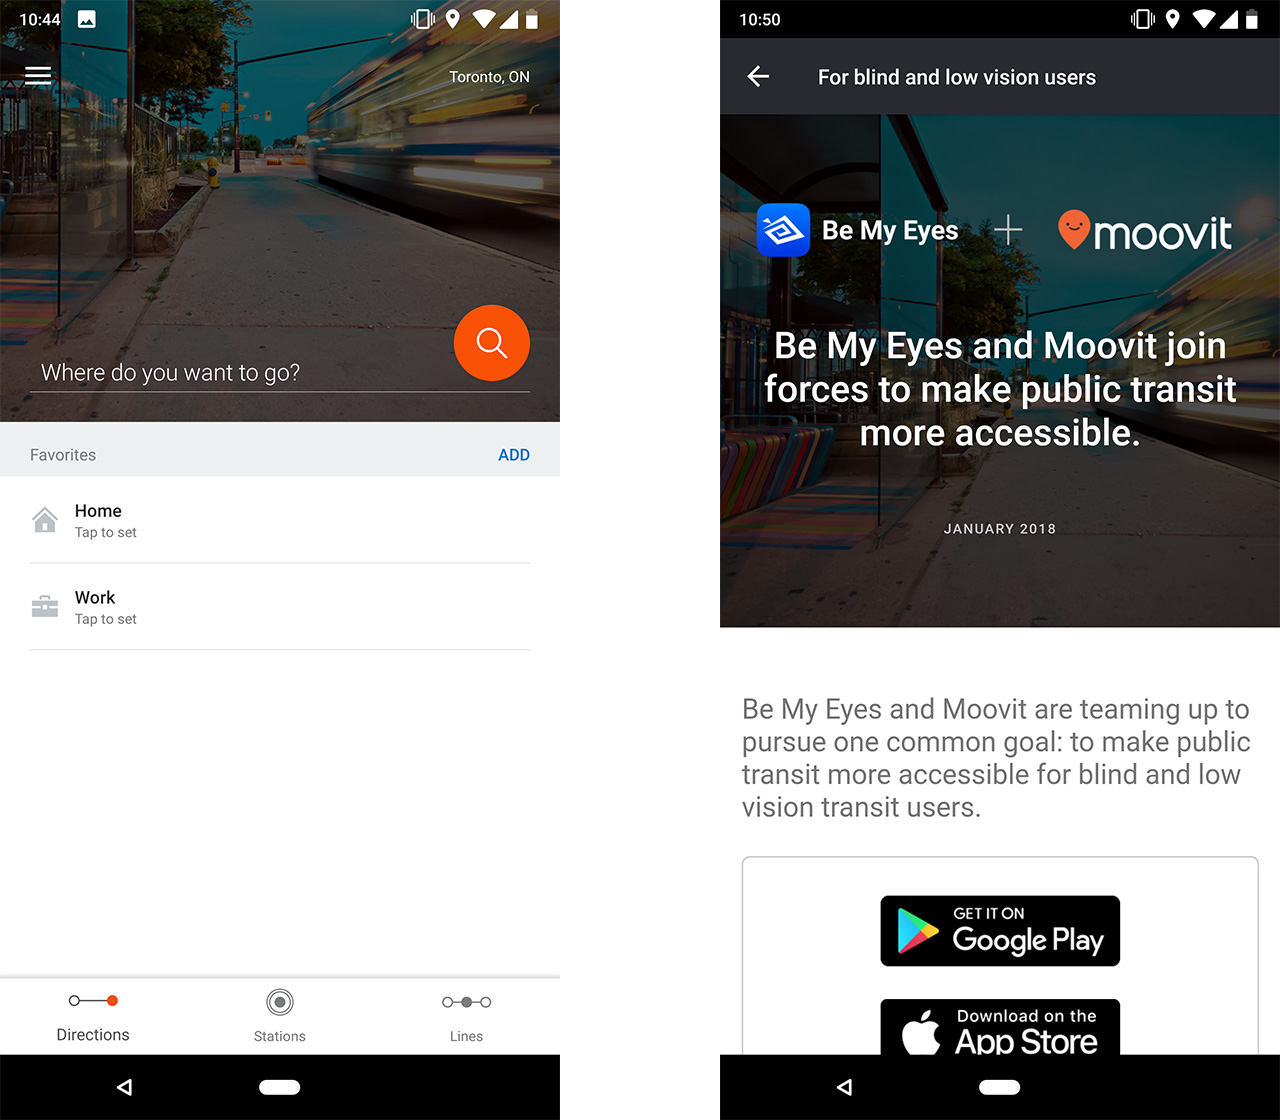 Moovit search and Be My Eyes partnership